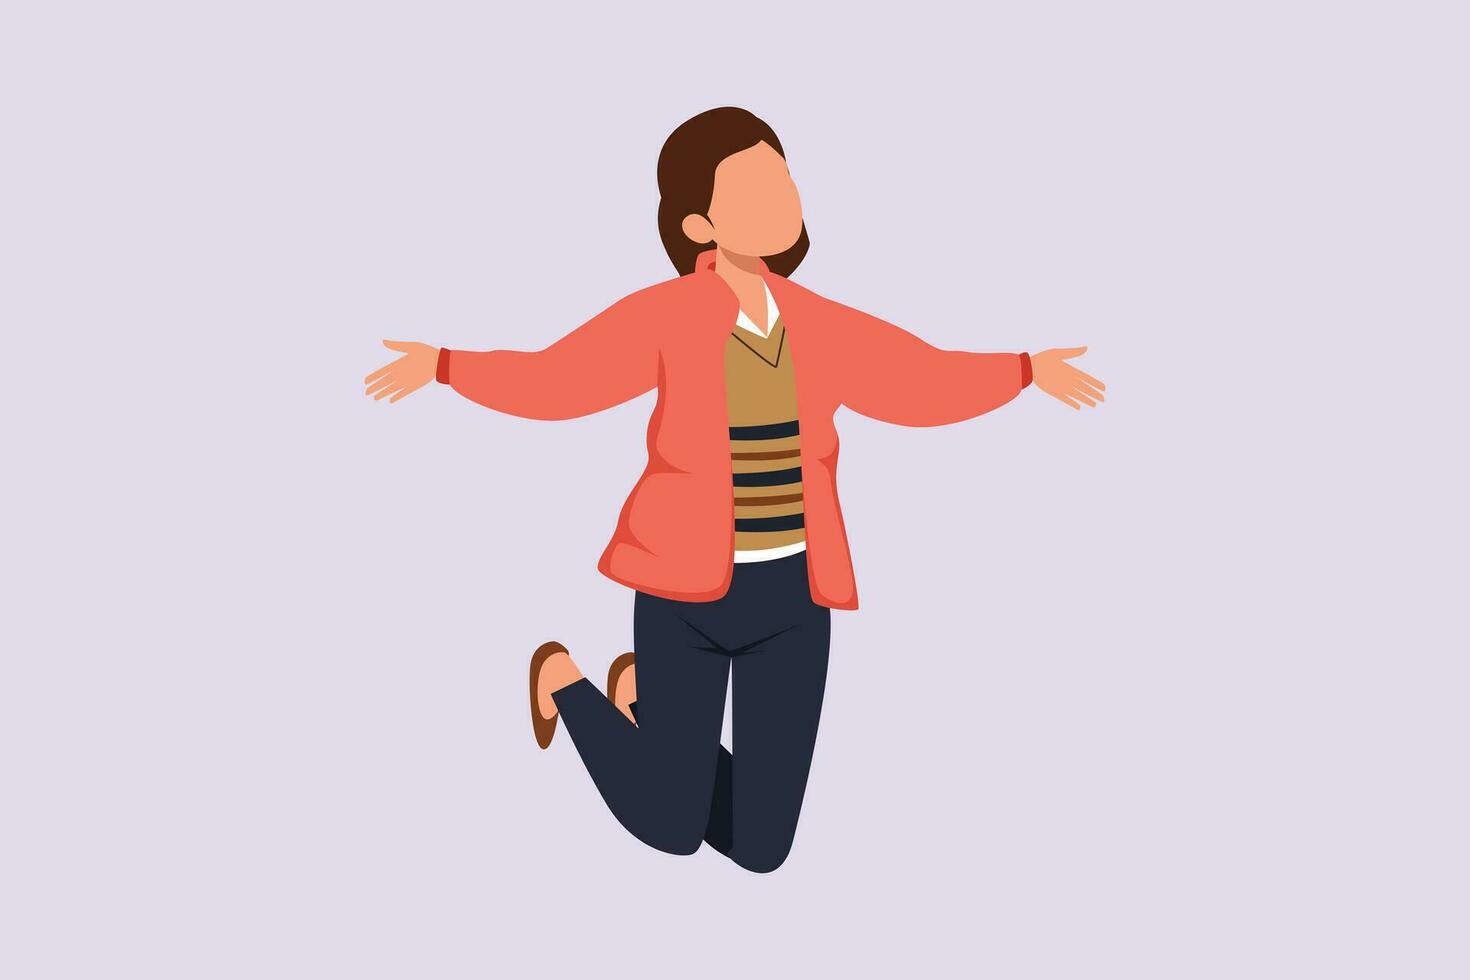 Happy jumping concept. Colored flat vector illustration isolated.